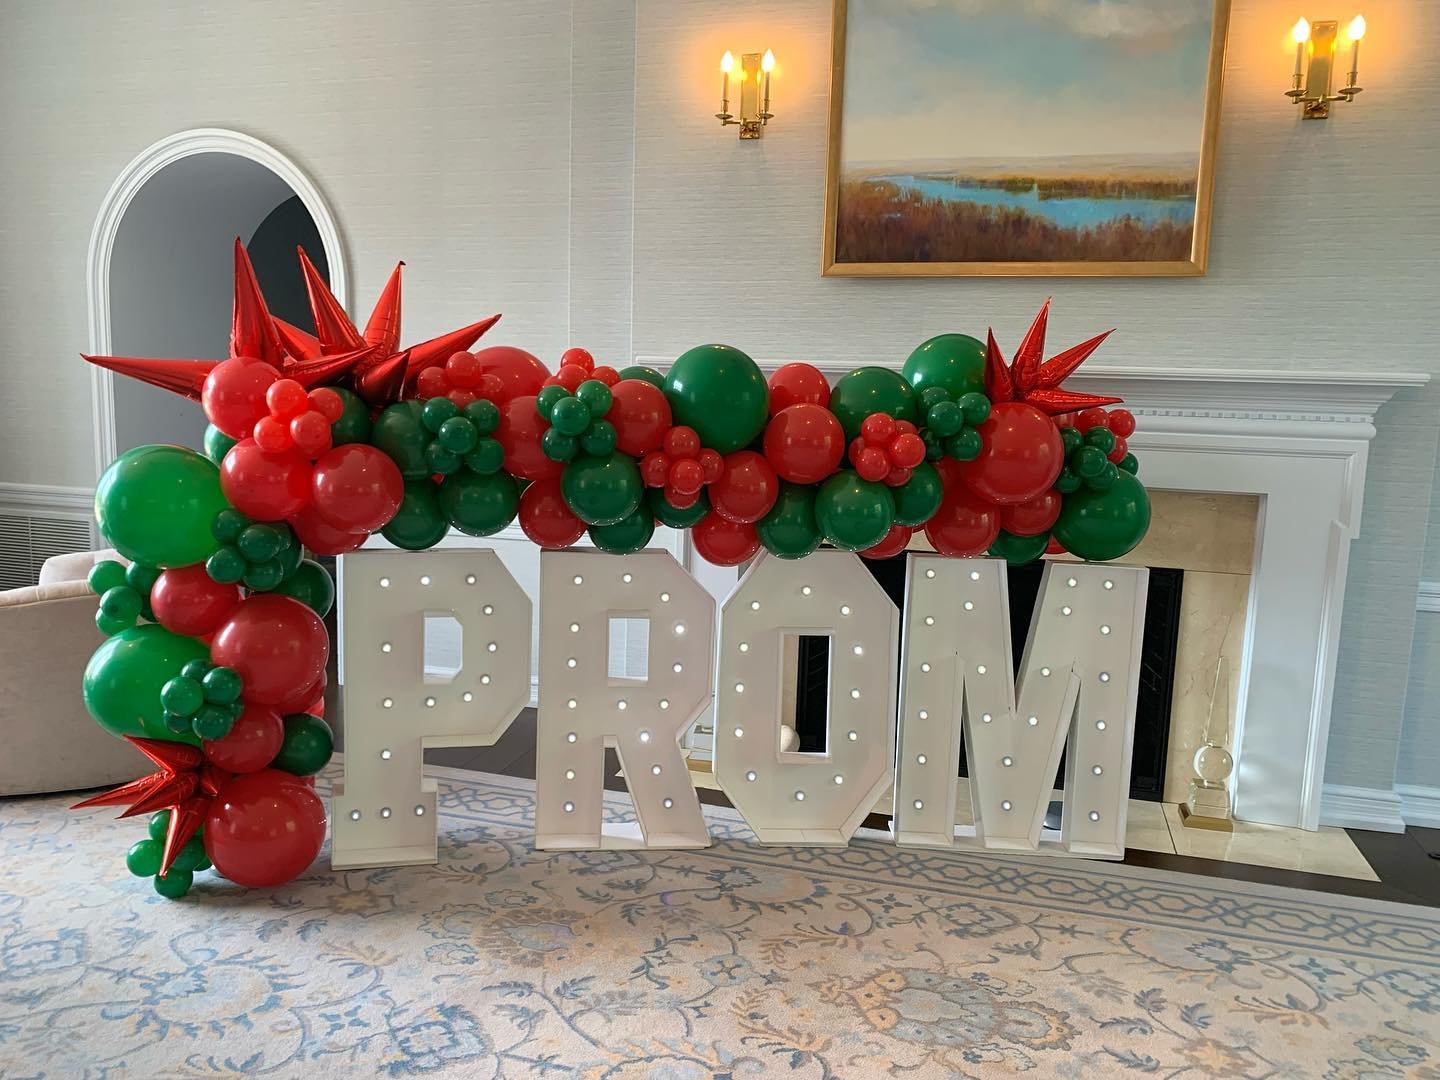 Prom, prom, and more prom! We hope everyone had a fun and successful promposal season, we know we did!&hearts;️
-
-
-
-
#balloontheorystl #balloons #balloonart #balloondecor #balloondecoration #balloonartist #prom2024 #promposal #promposalszn #promba